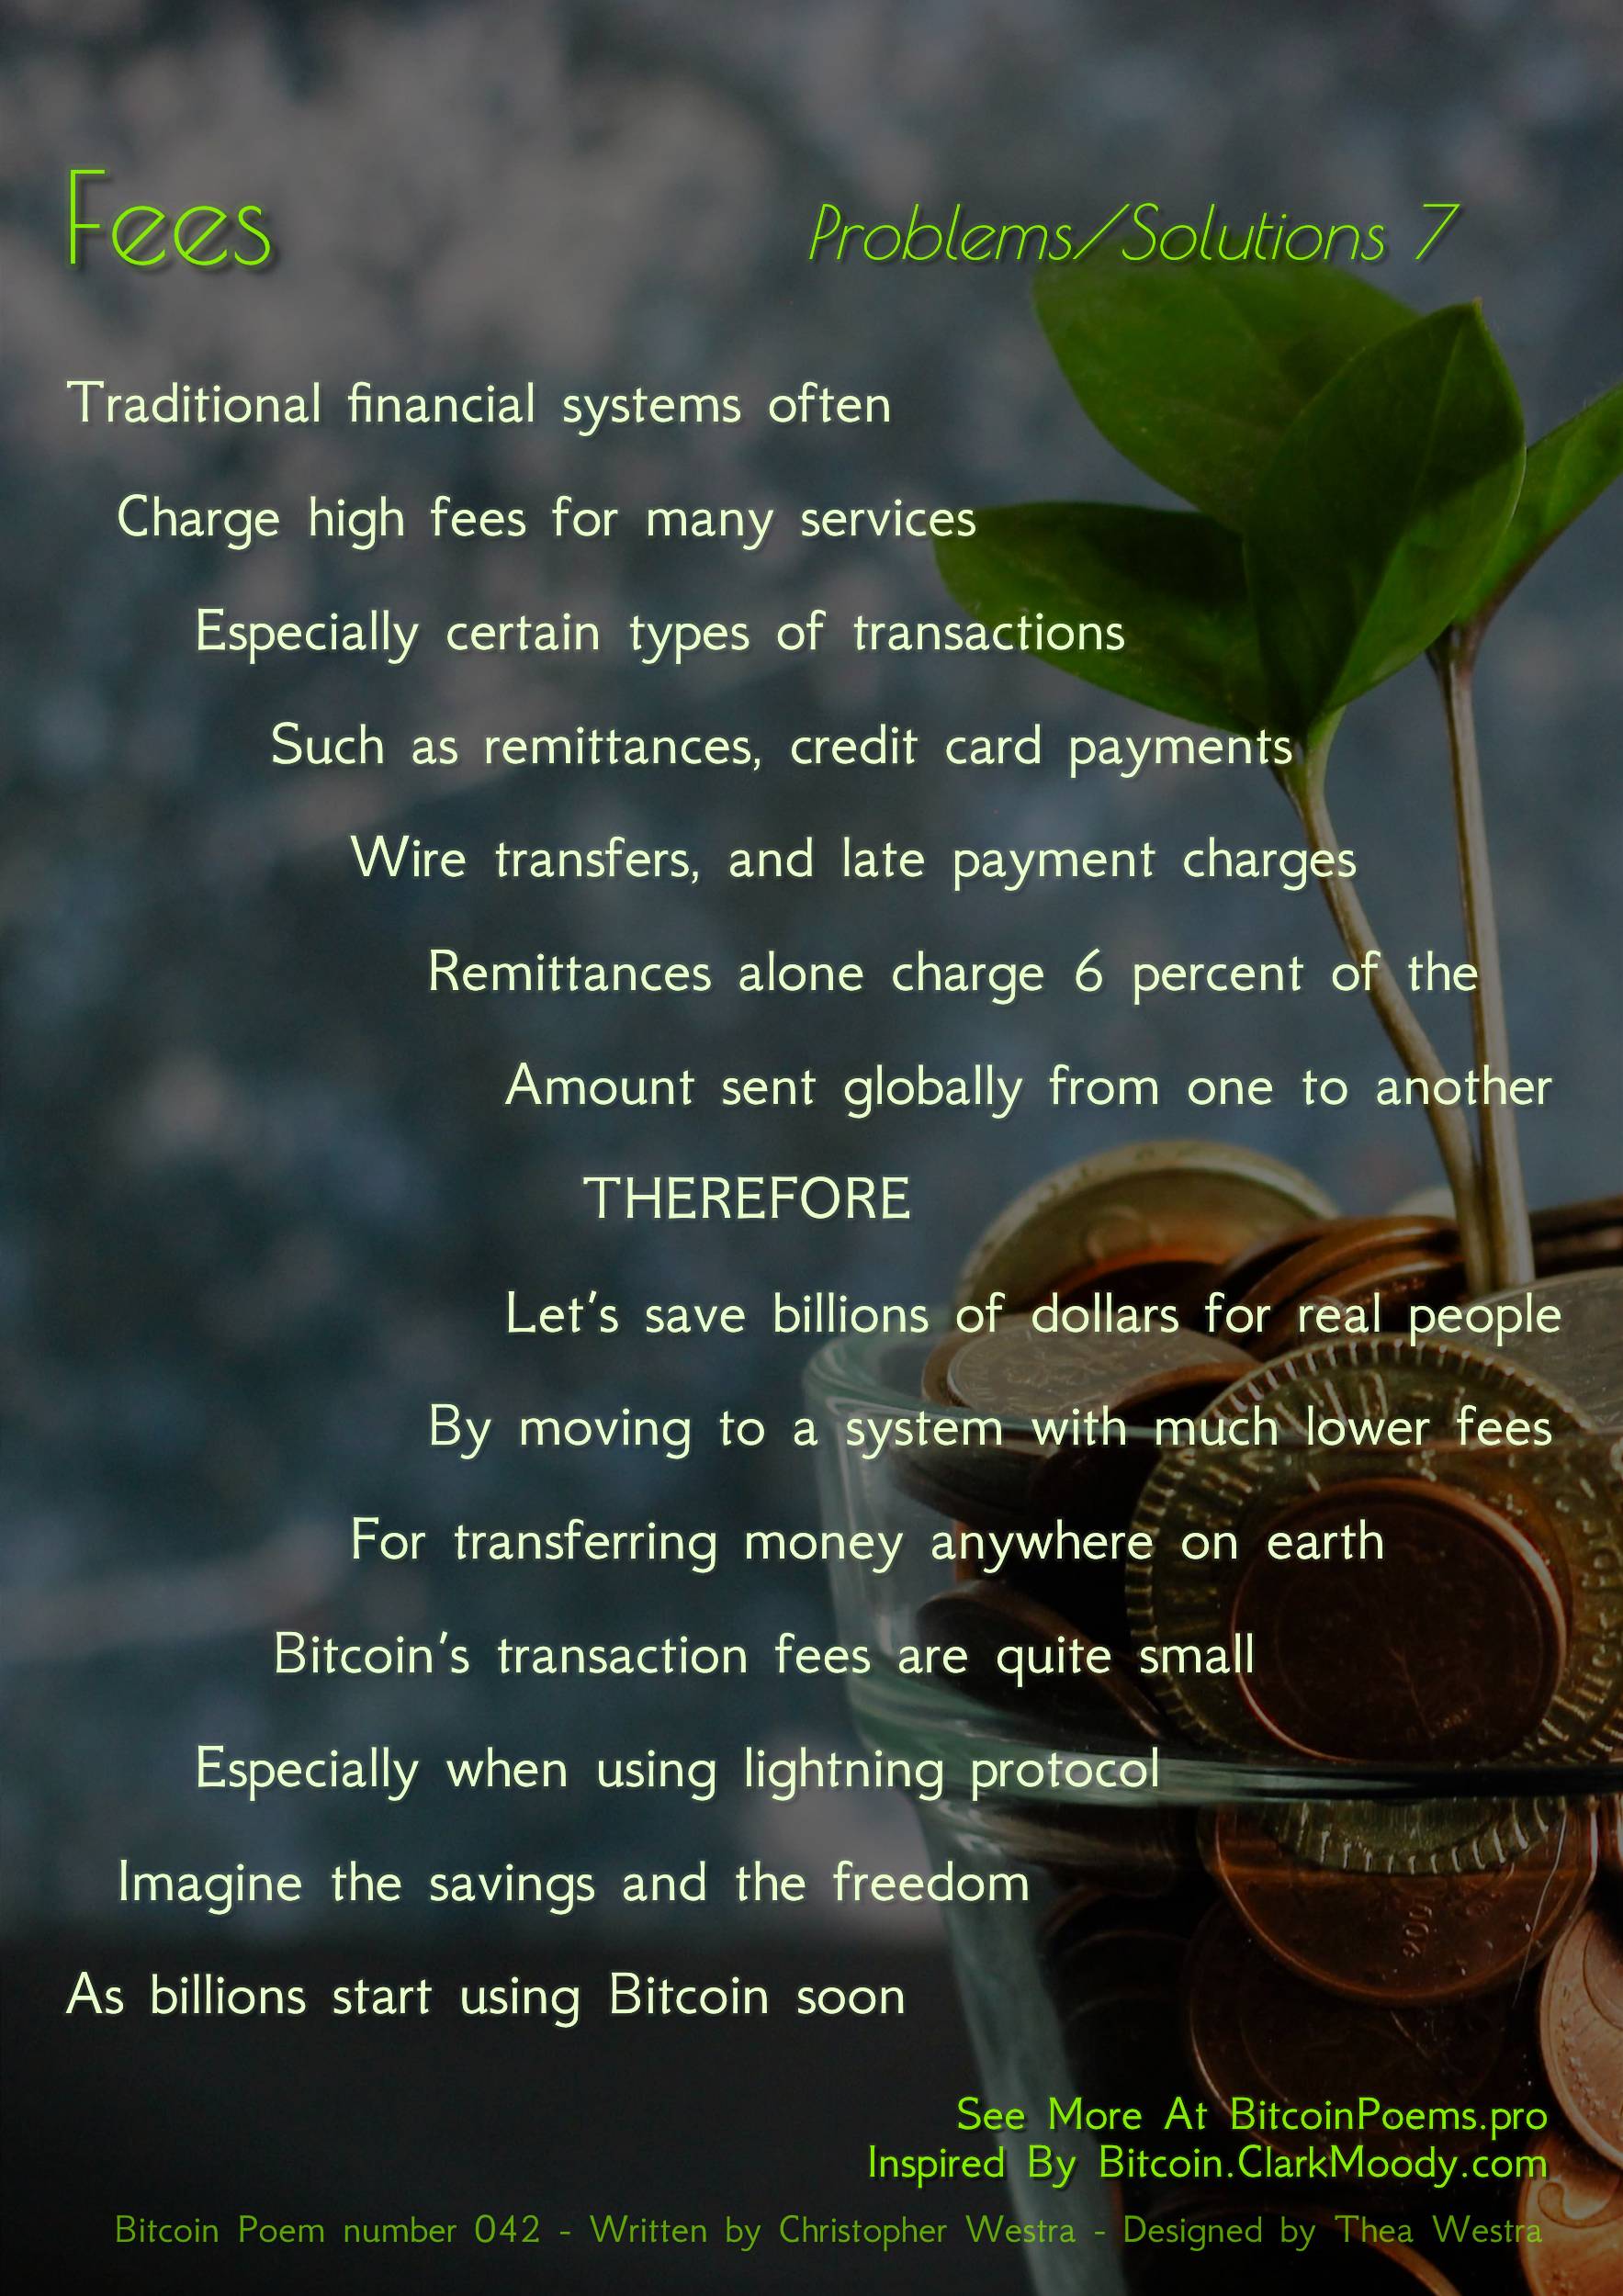 Fees - Bitcoin Poem 042 by Christopher Westra